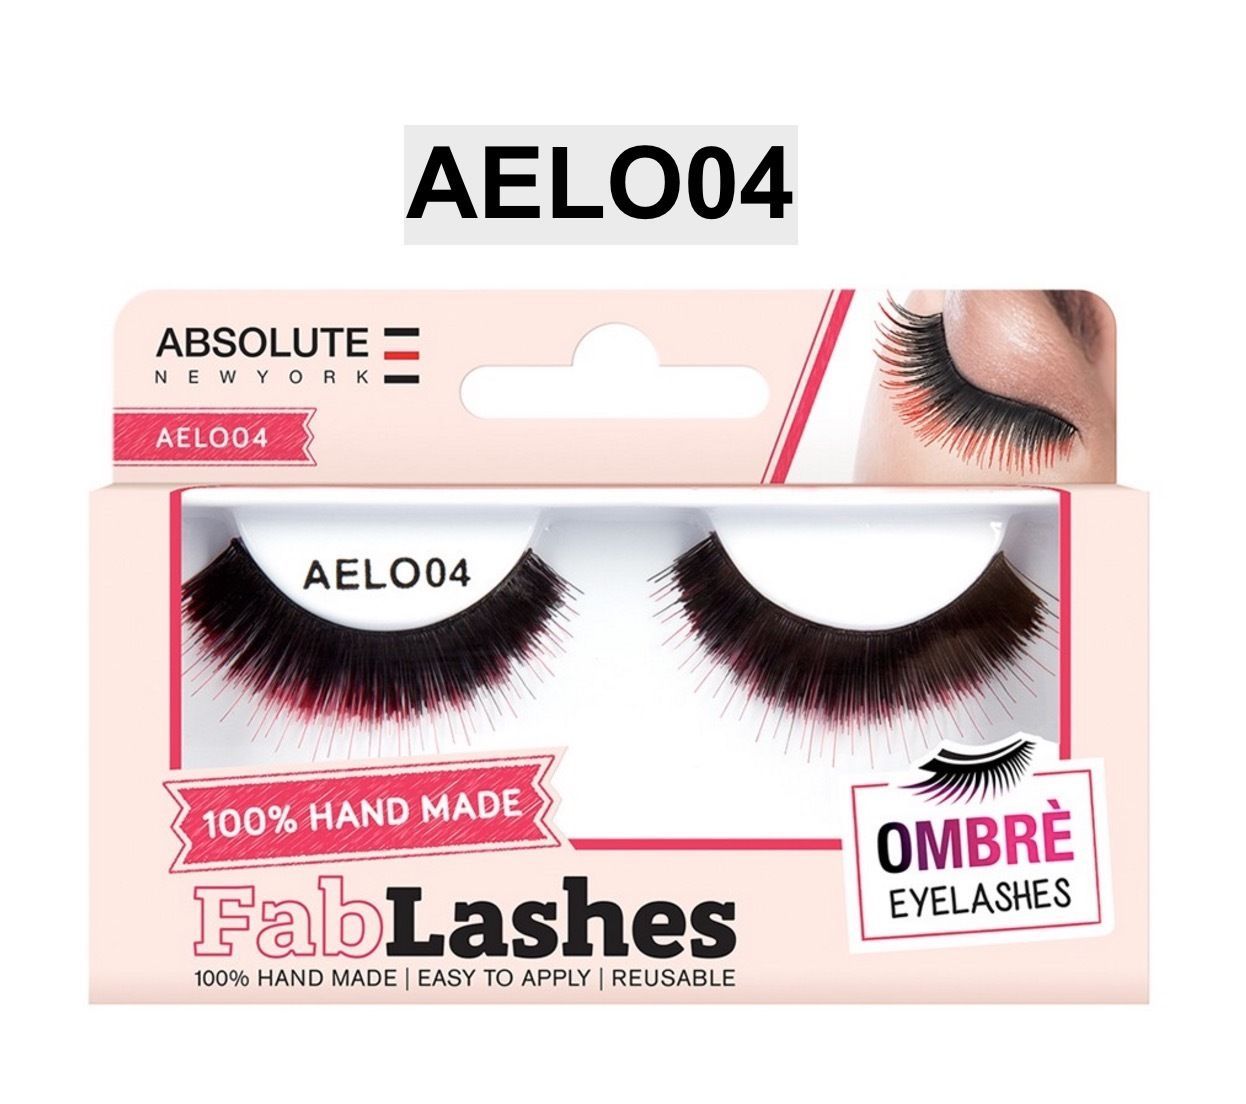 ABSOLUTE NEW YORK 100% HAND MADE FAB LASHES OMBRE EYELASHES AELO04 - $1.99